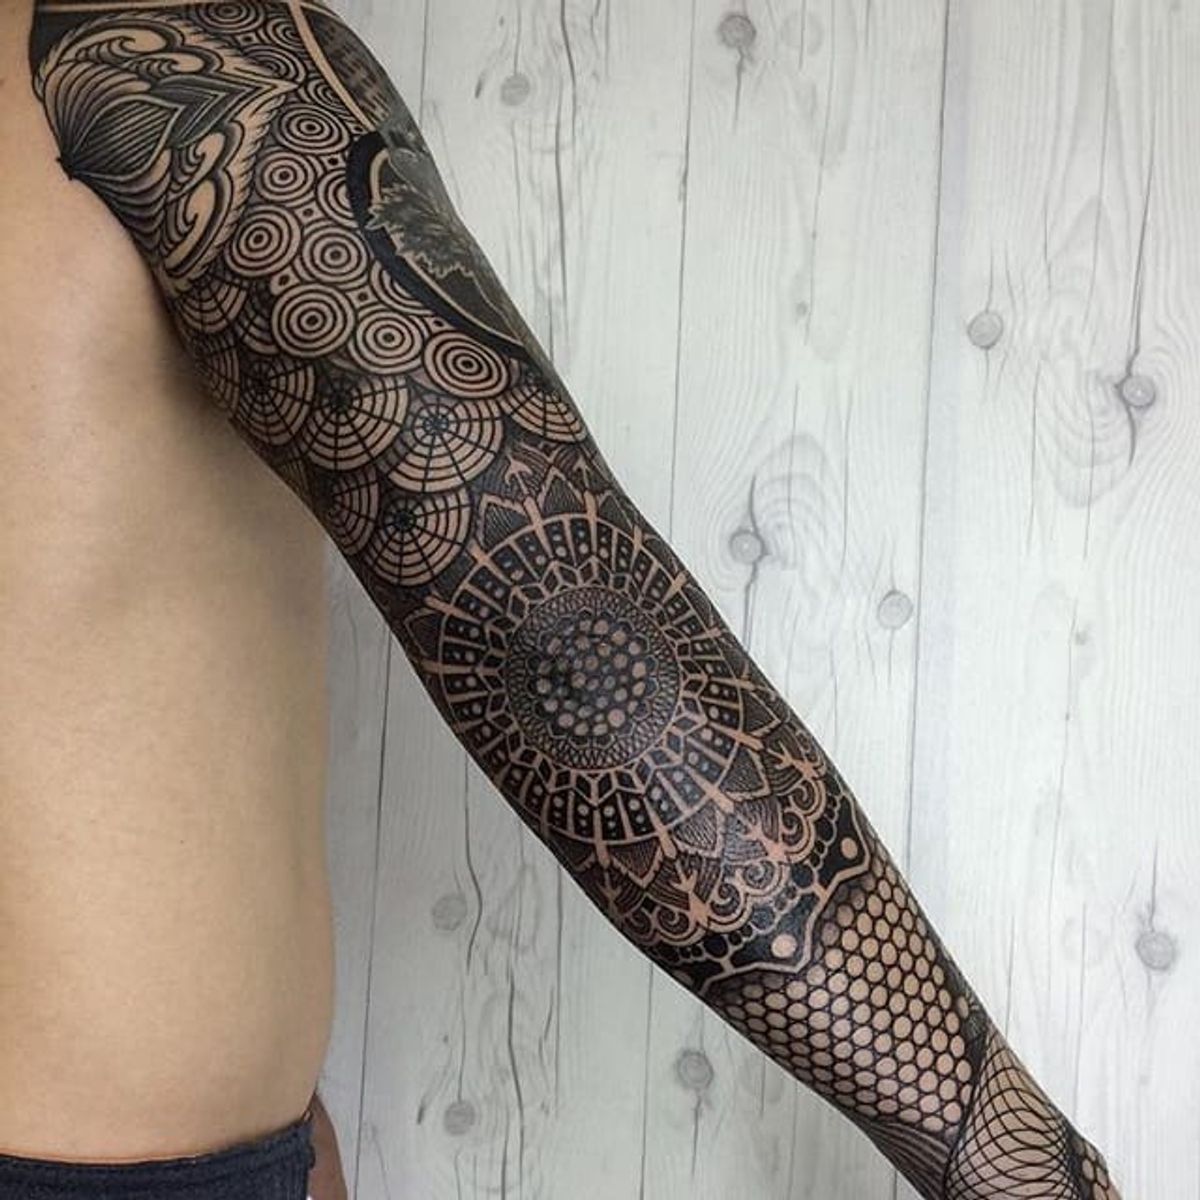 Tattoo uploaded by Ross Howerton • Mandalas and more geometric amazemnt ...